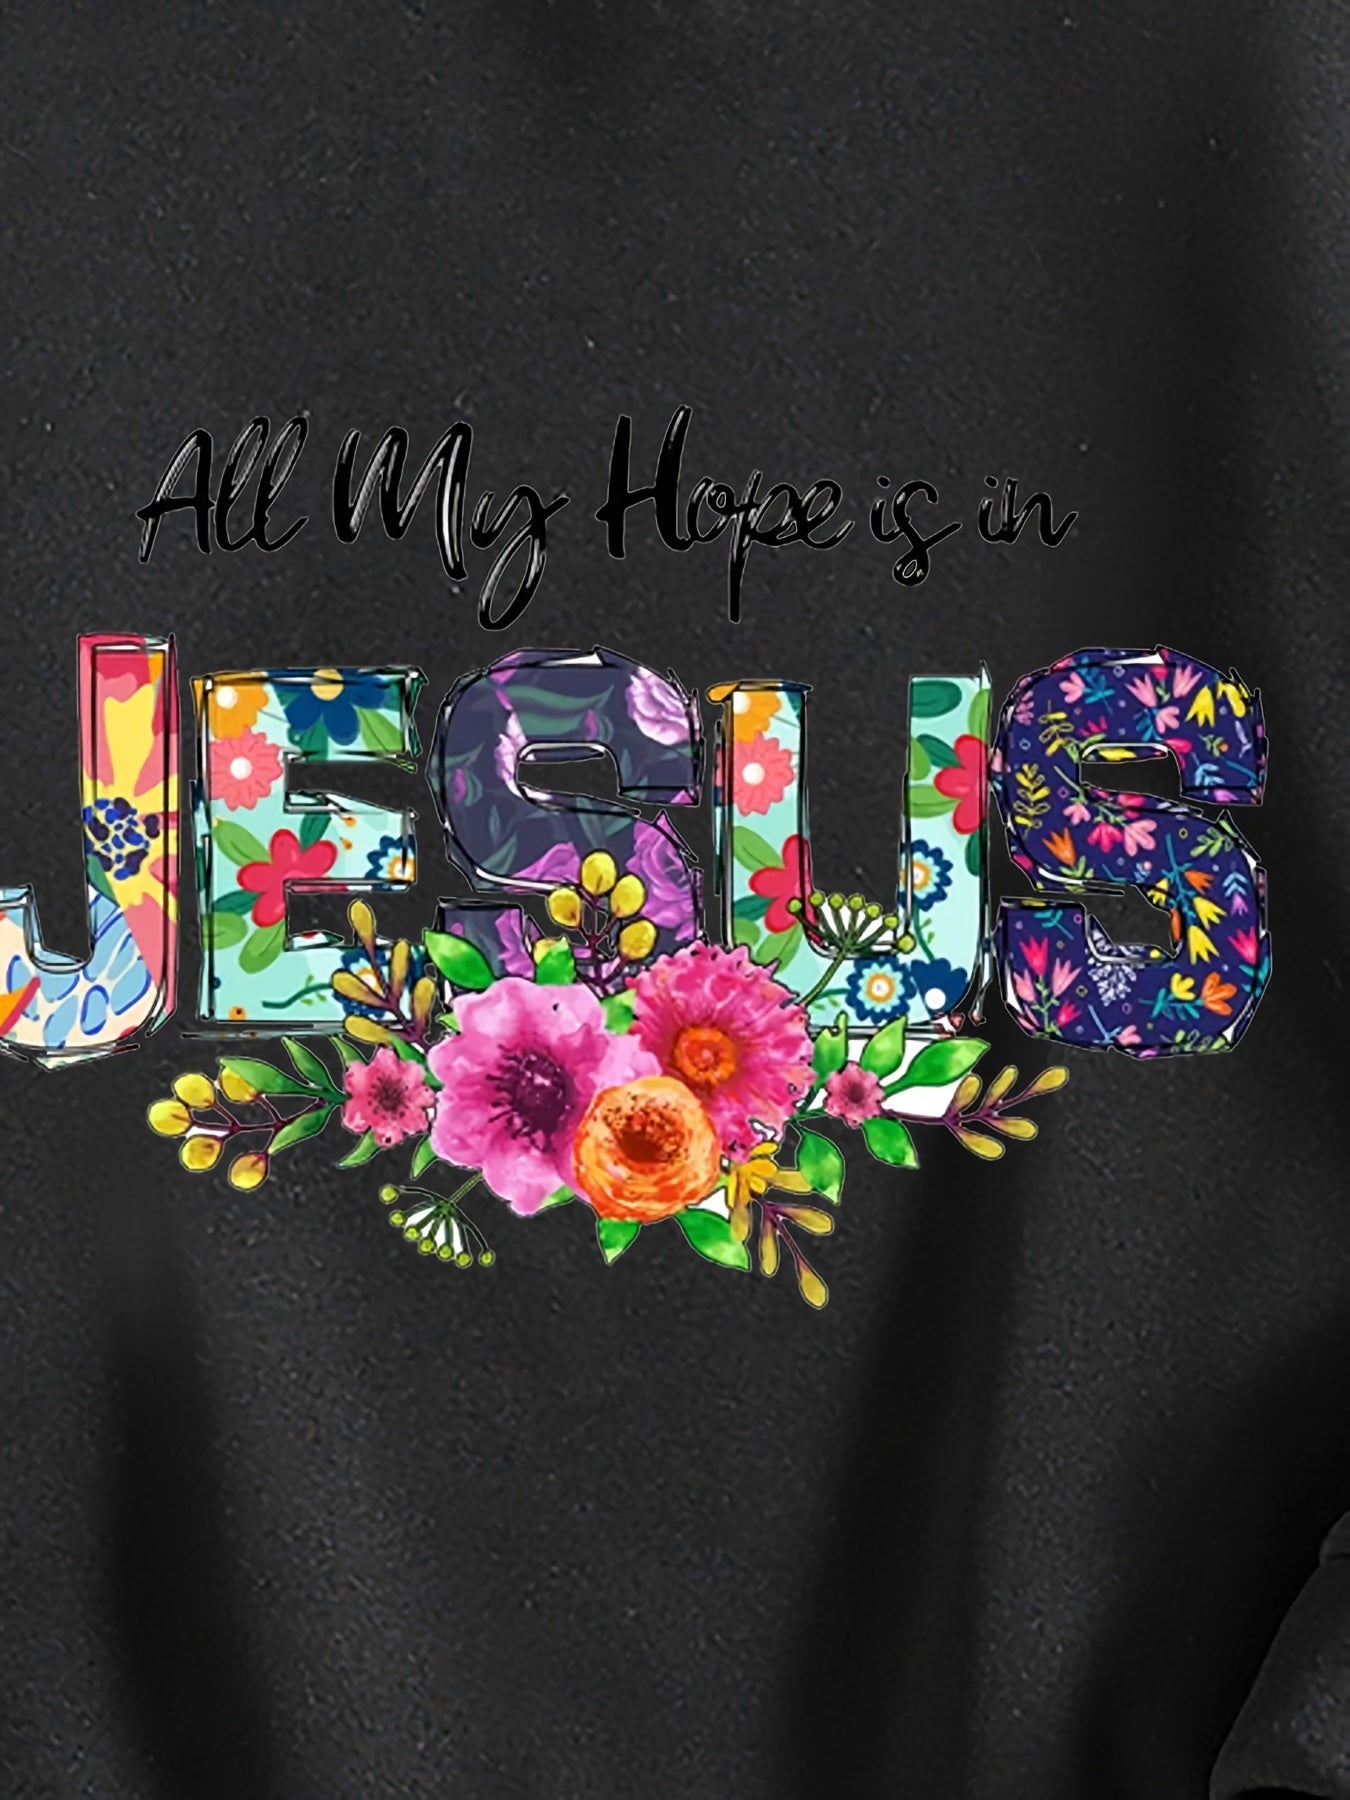 ALL MY HOPE IS IN JESUS Youth Christian Casual Outfit claimedbygoddesigns